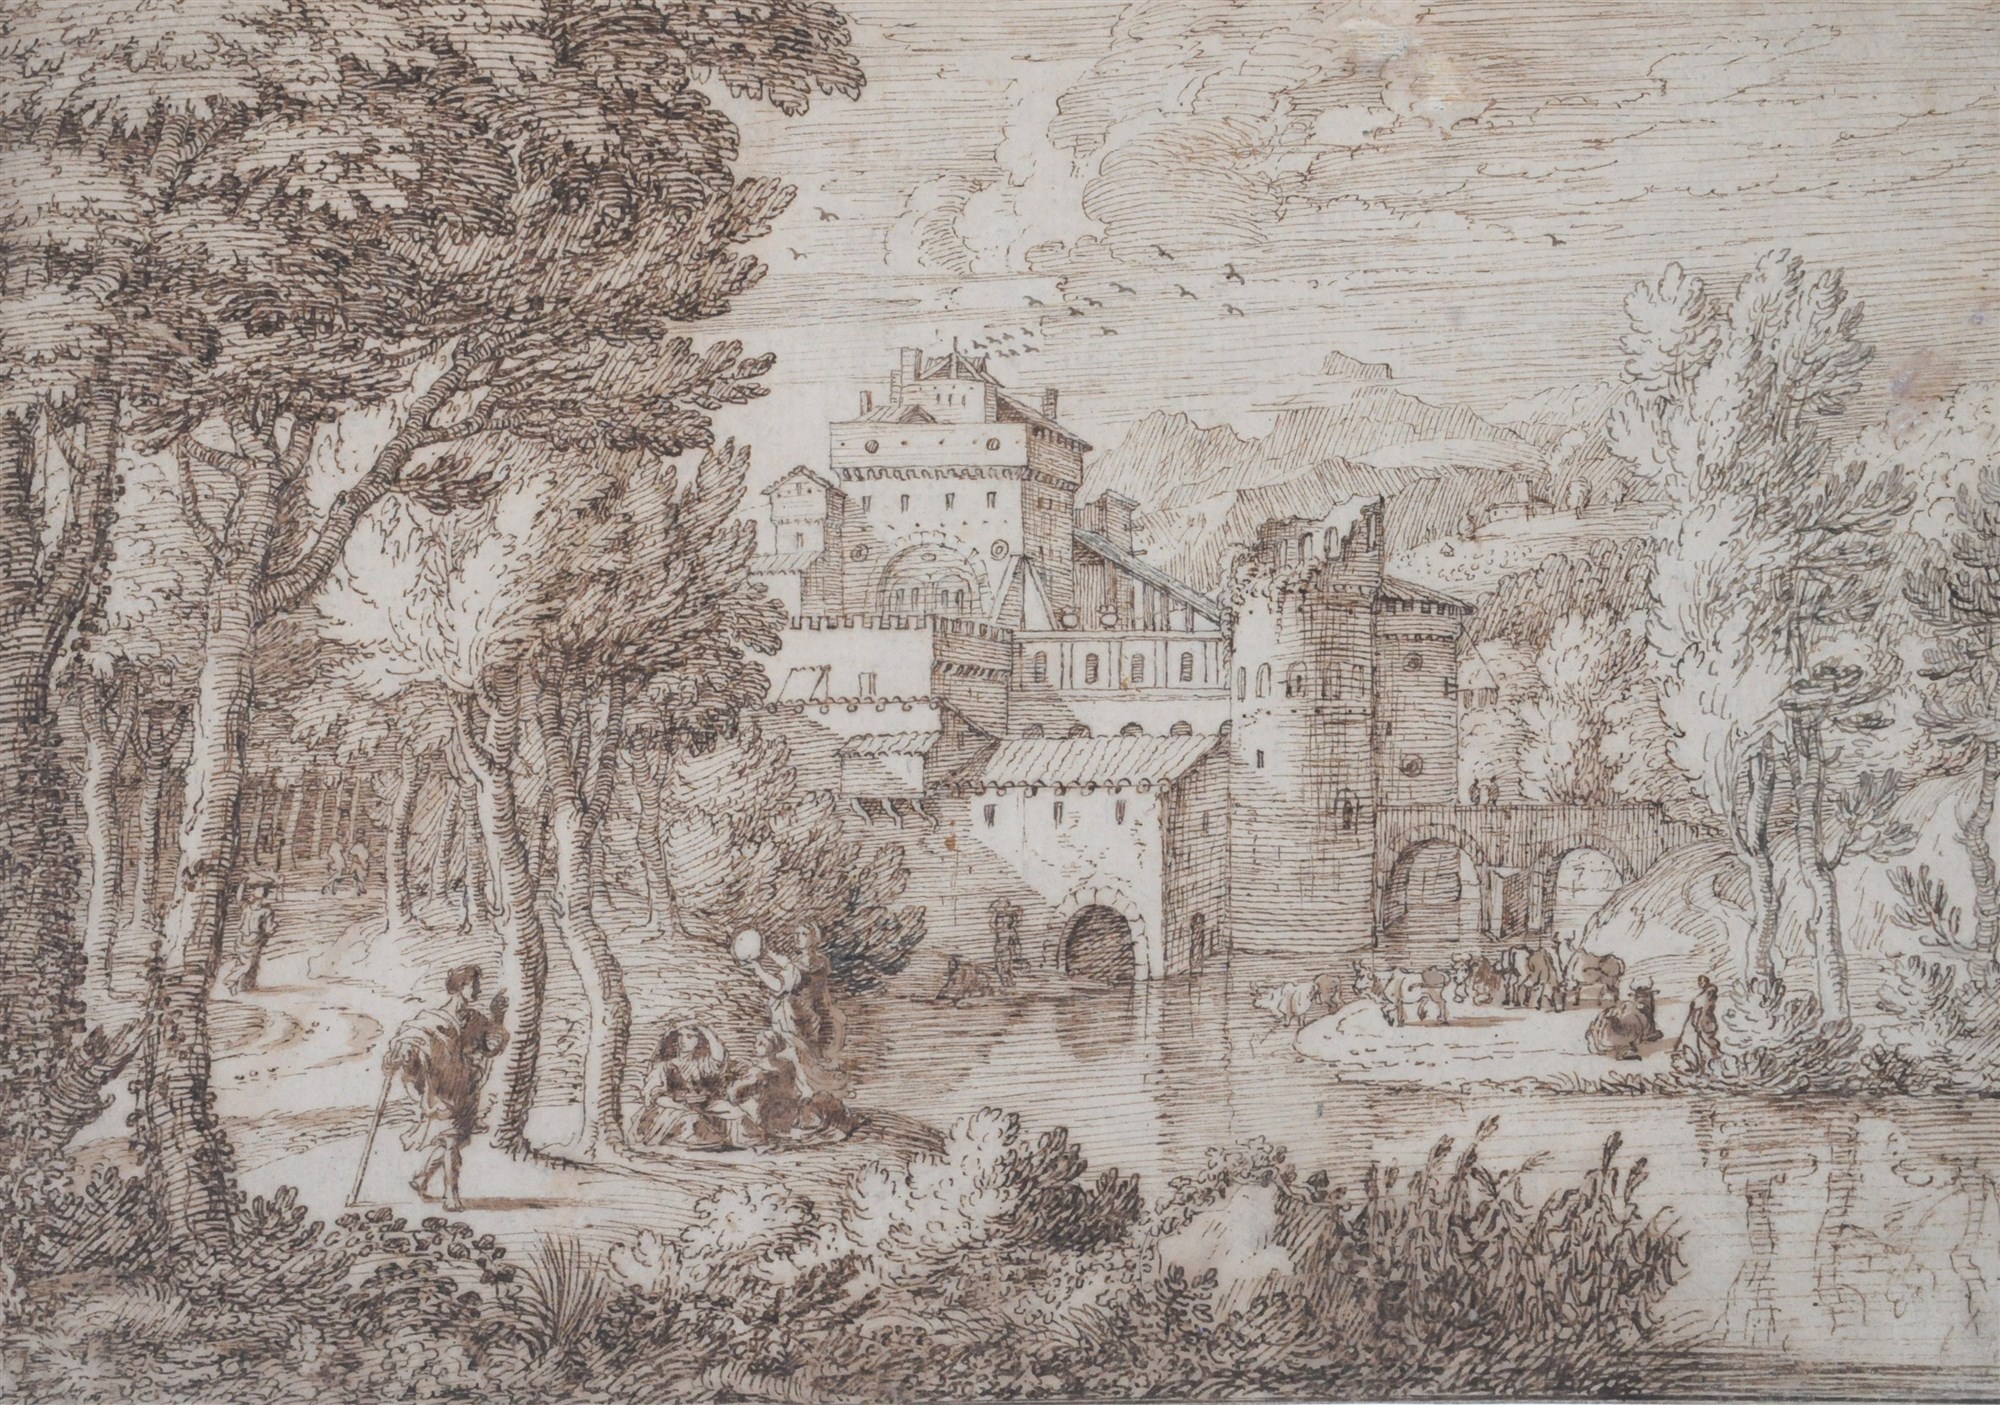 Attributed to Johannes Glaubber, pen and ink